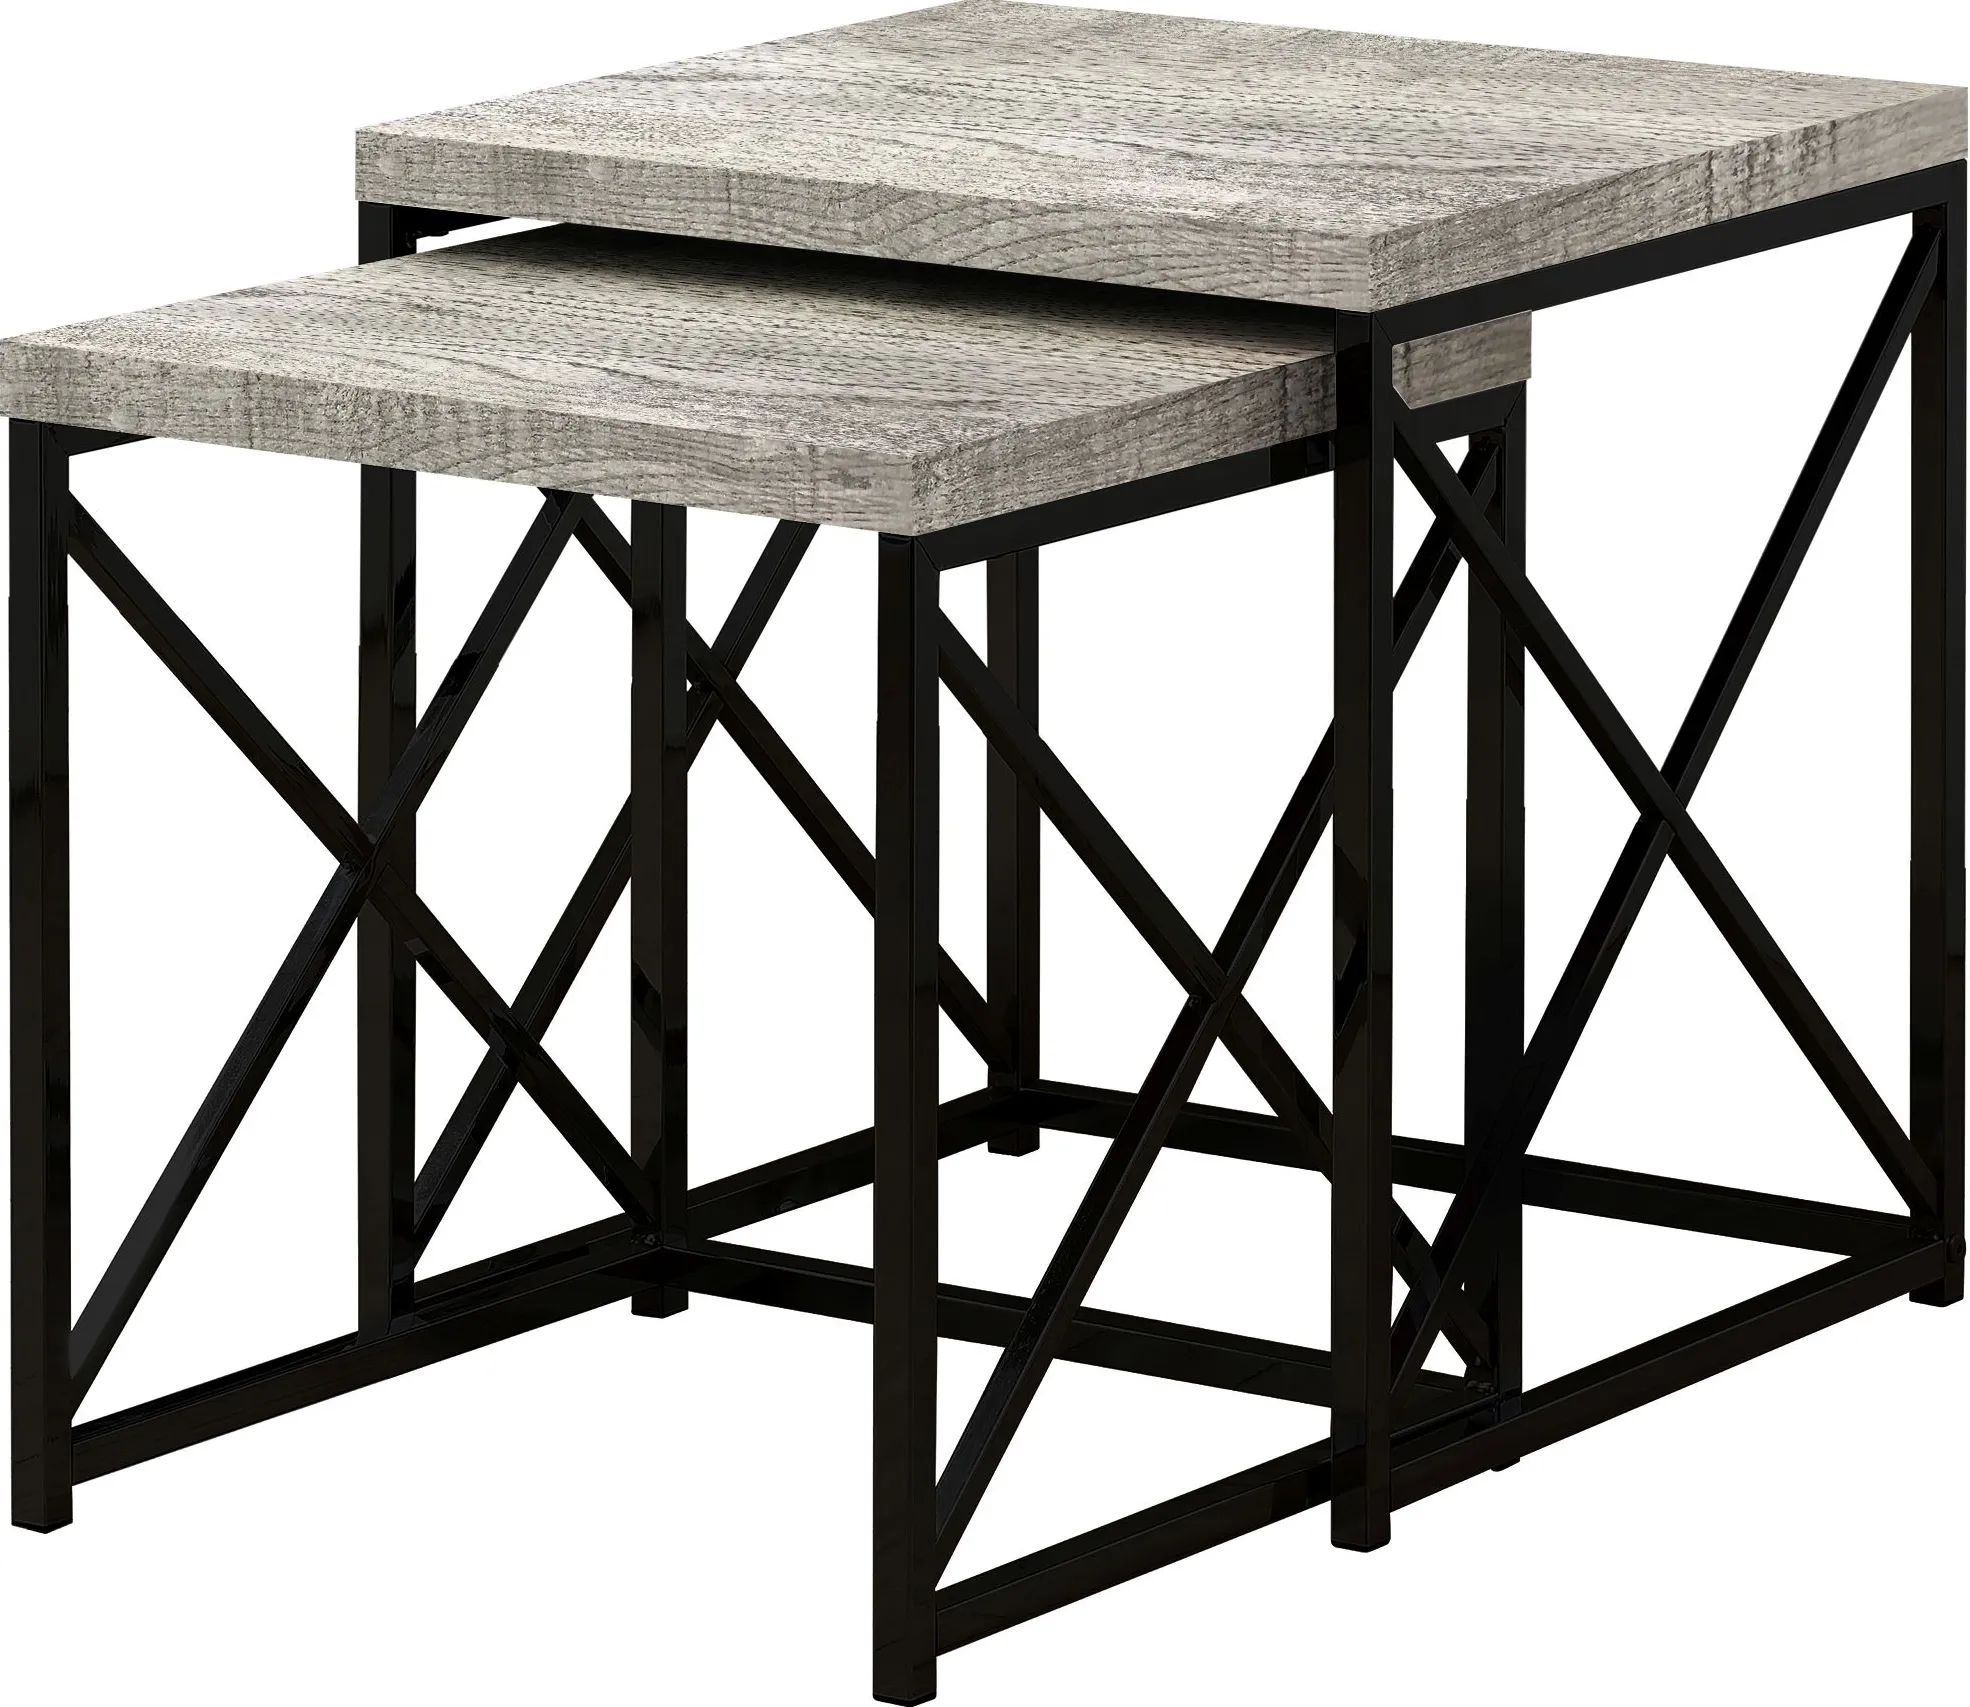 Nesting Table, Set Of 2, Side, End, Metal, Accent, Living Room, Bedroom, Metal, Laminate, Grey, Black, Contemporary, Modern